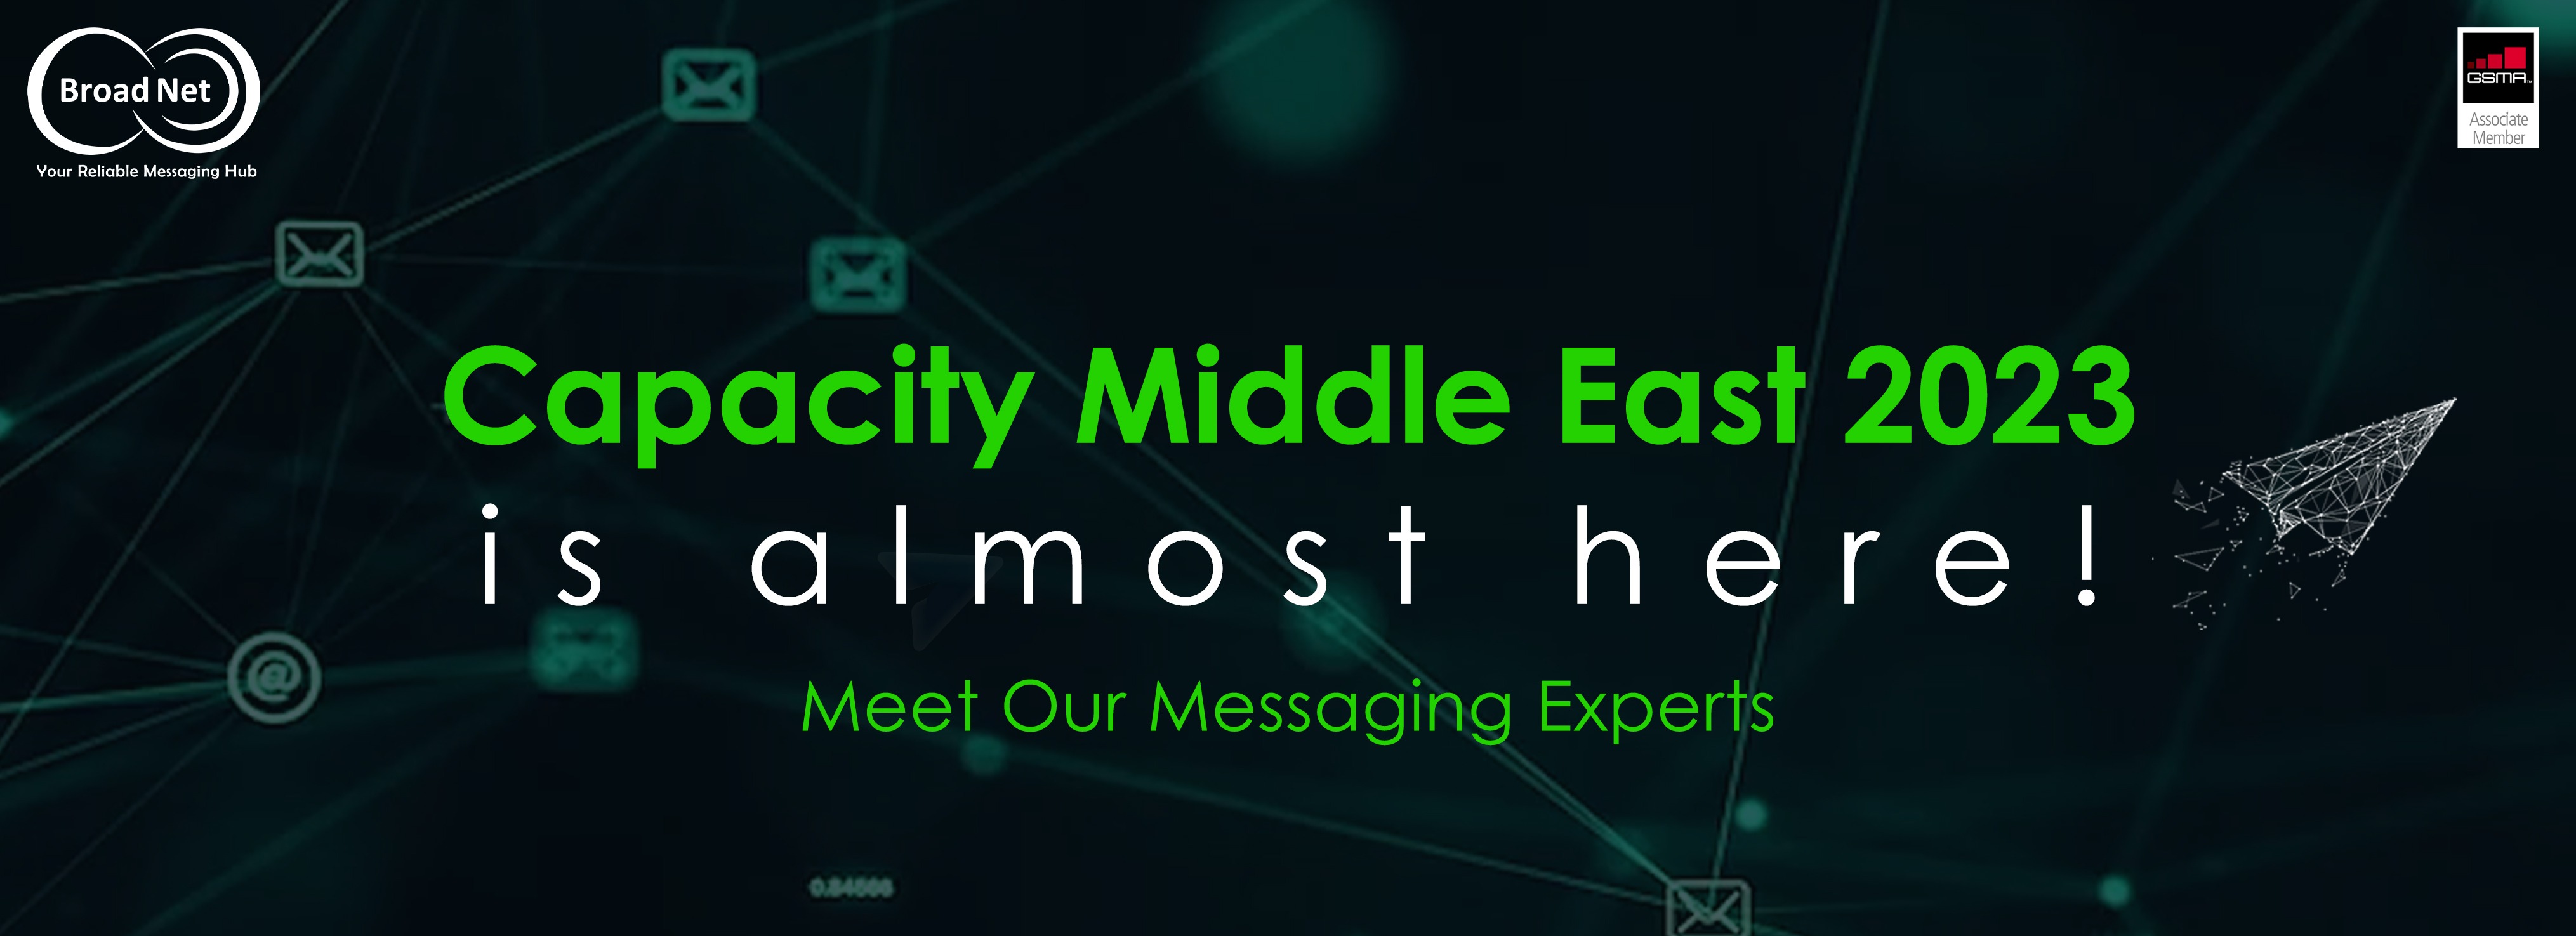 Capacity Middle East 2023 is almost here!